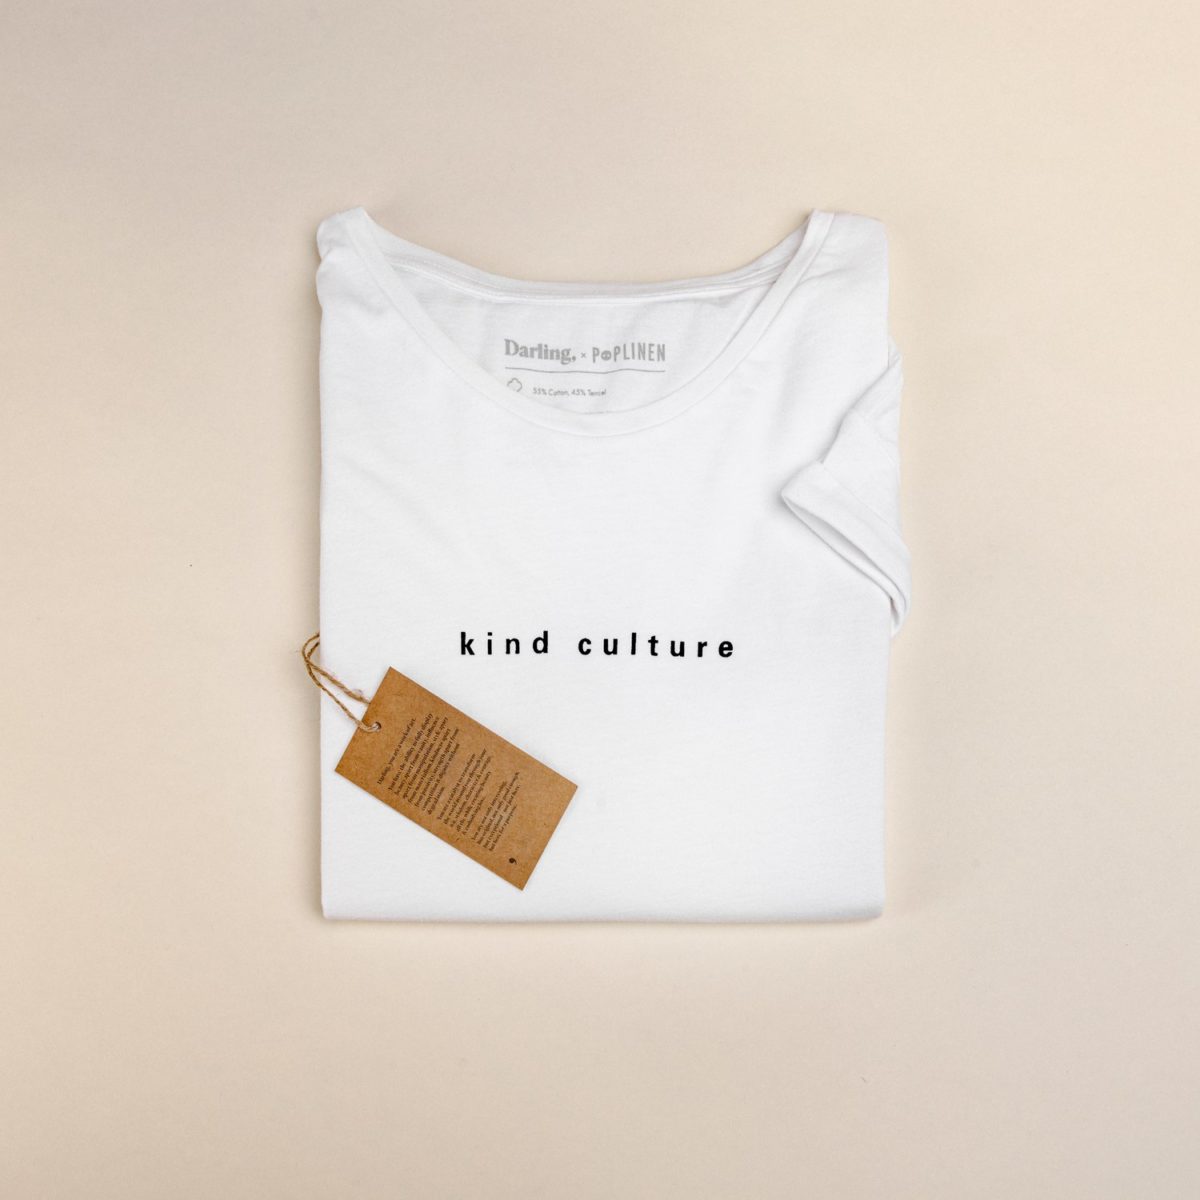 A folded t-shirt that says "Kind Culture"